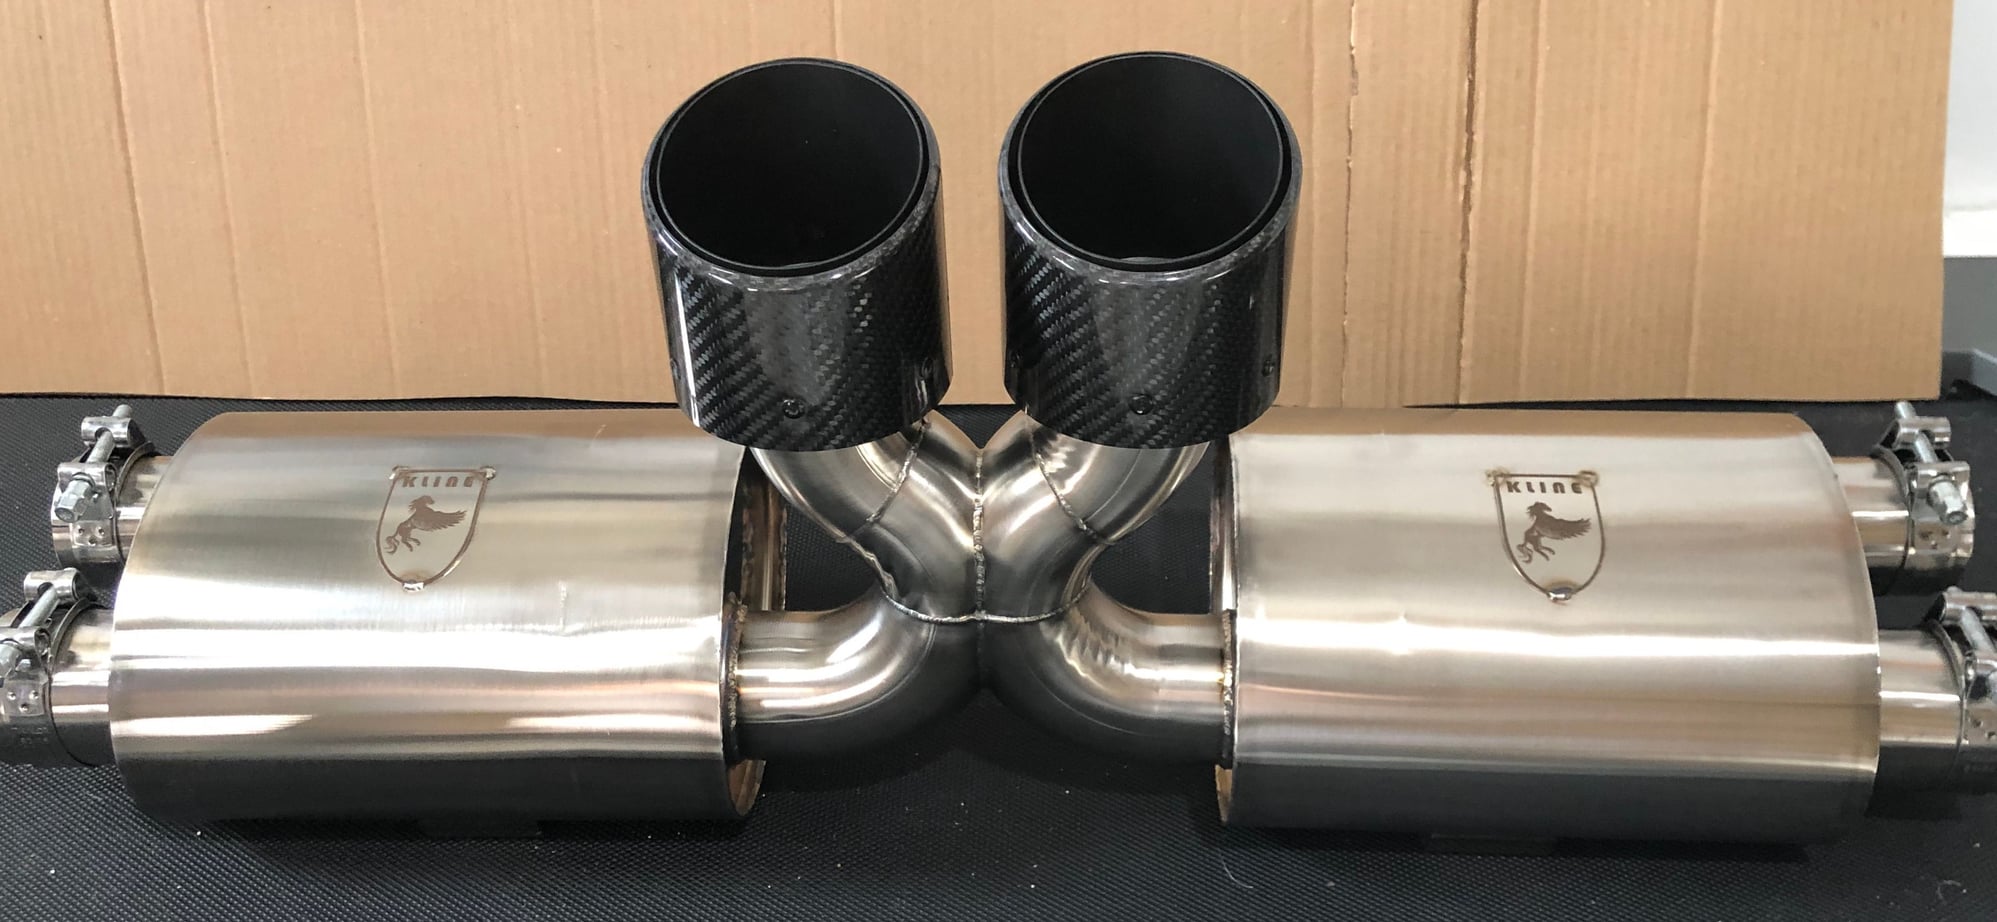 Engine - Exhaust - Complete Kline Inconel 625 991 GT3/RS Performance Exhaust System w/Kline Manifolds - New - Springfield Gardens, NY 11413, United States